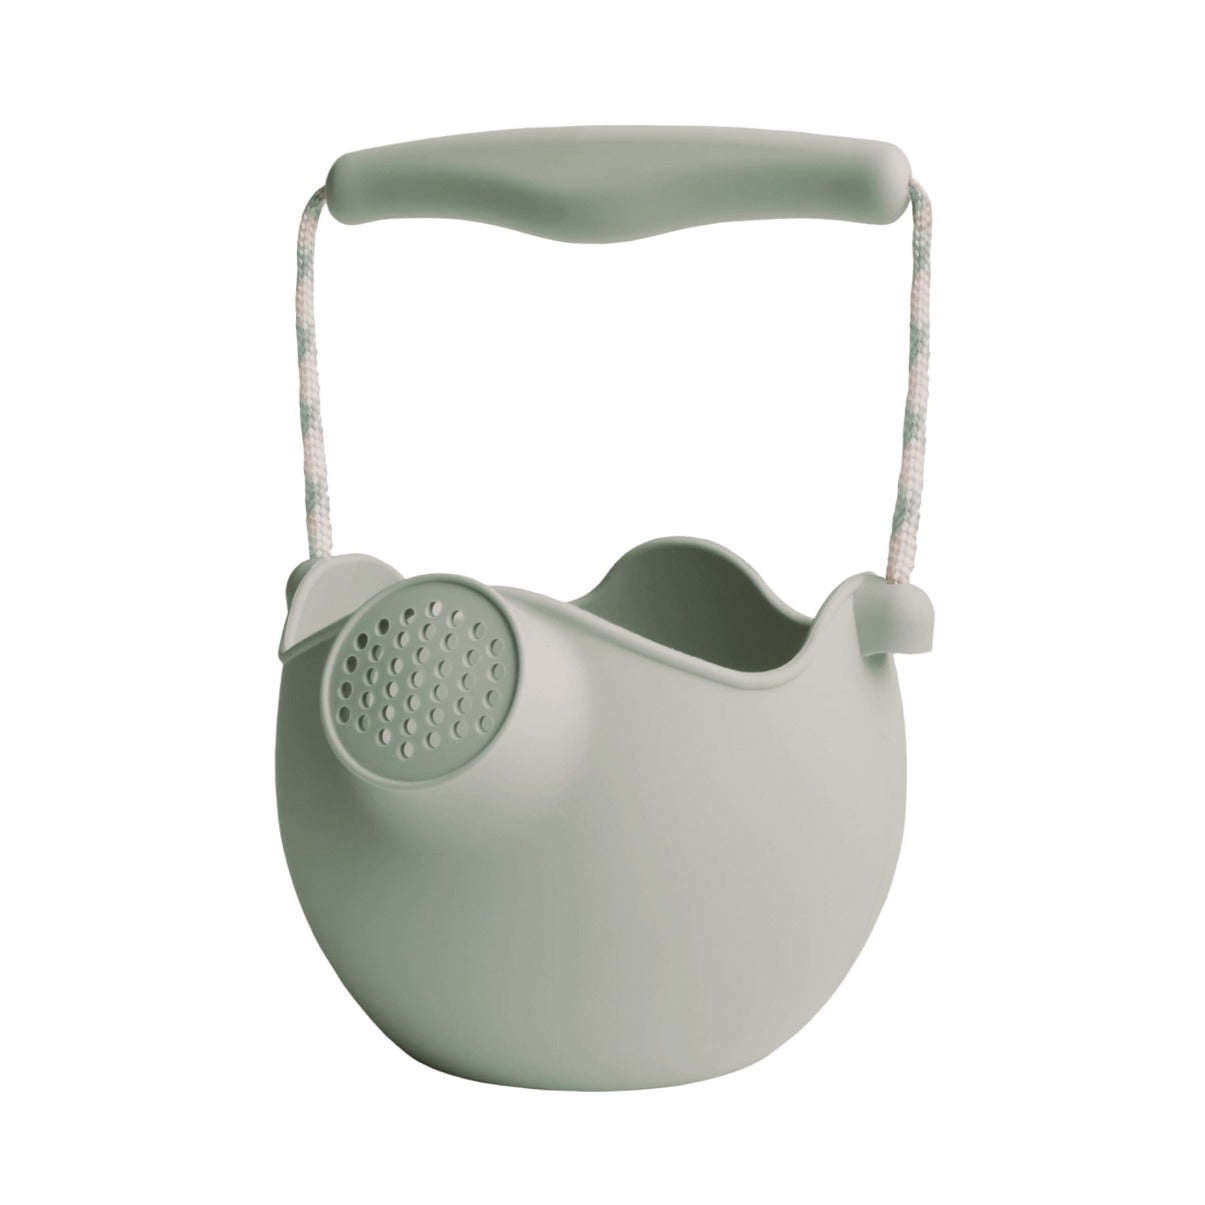 Scrunch Watering Can in Sage | Scrunch Beach Toys available at Bear & Moo